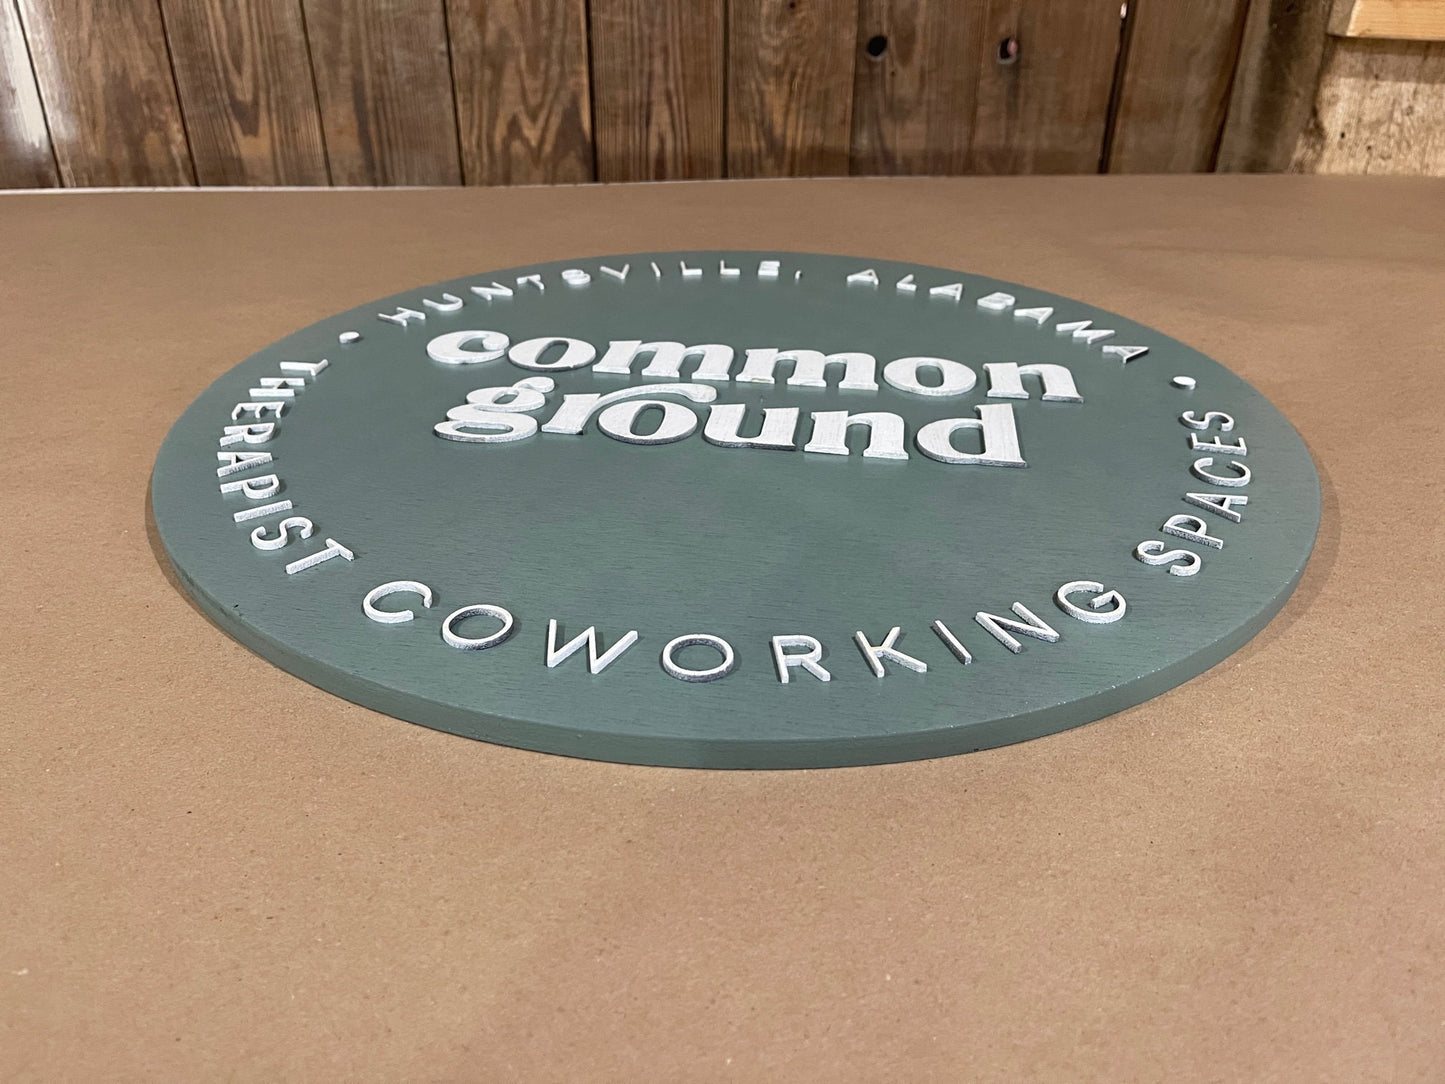 Large Round Custom Sign Commerical Signage Common Ground Therapy Coworker Personalized Logo Emblem Made To Order 3D Raised Text Handmade